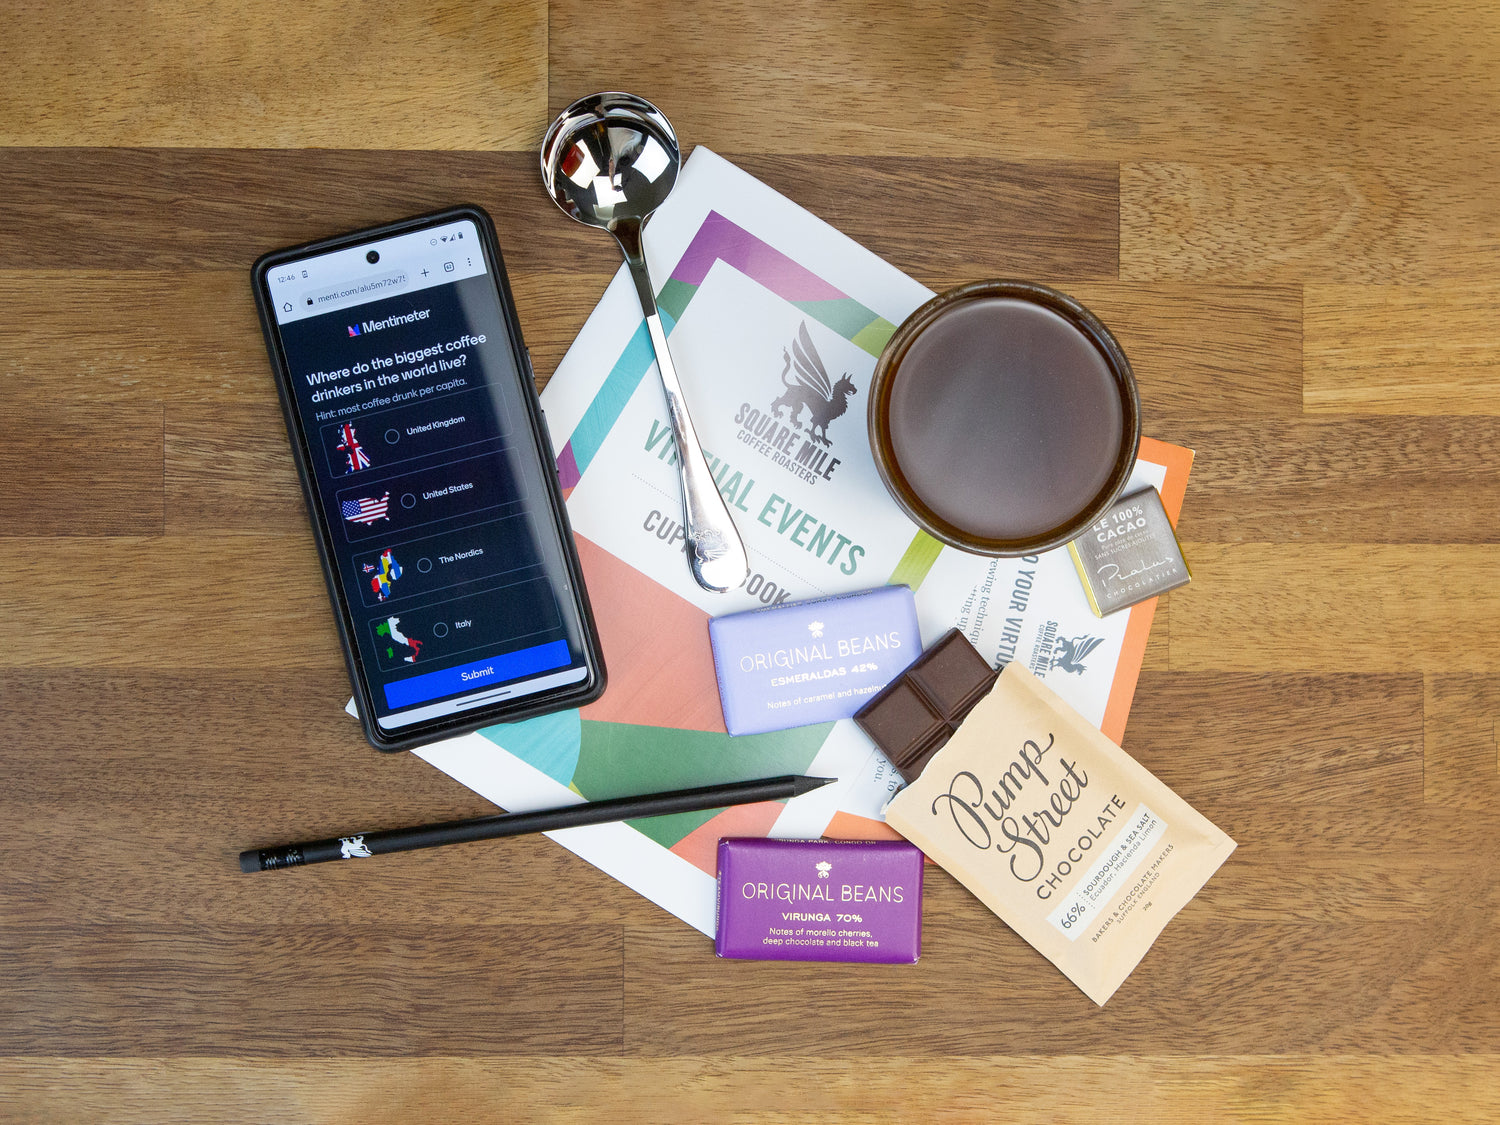 Square Mile Coffee and Chocolate event kit